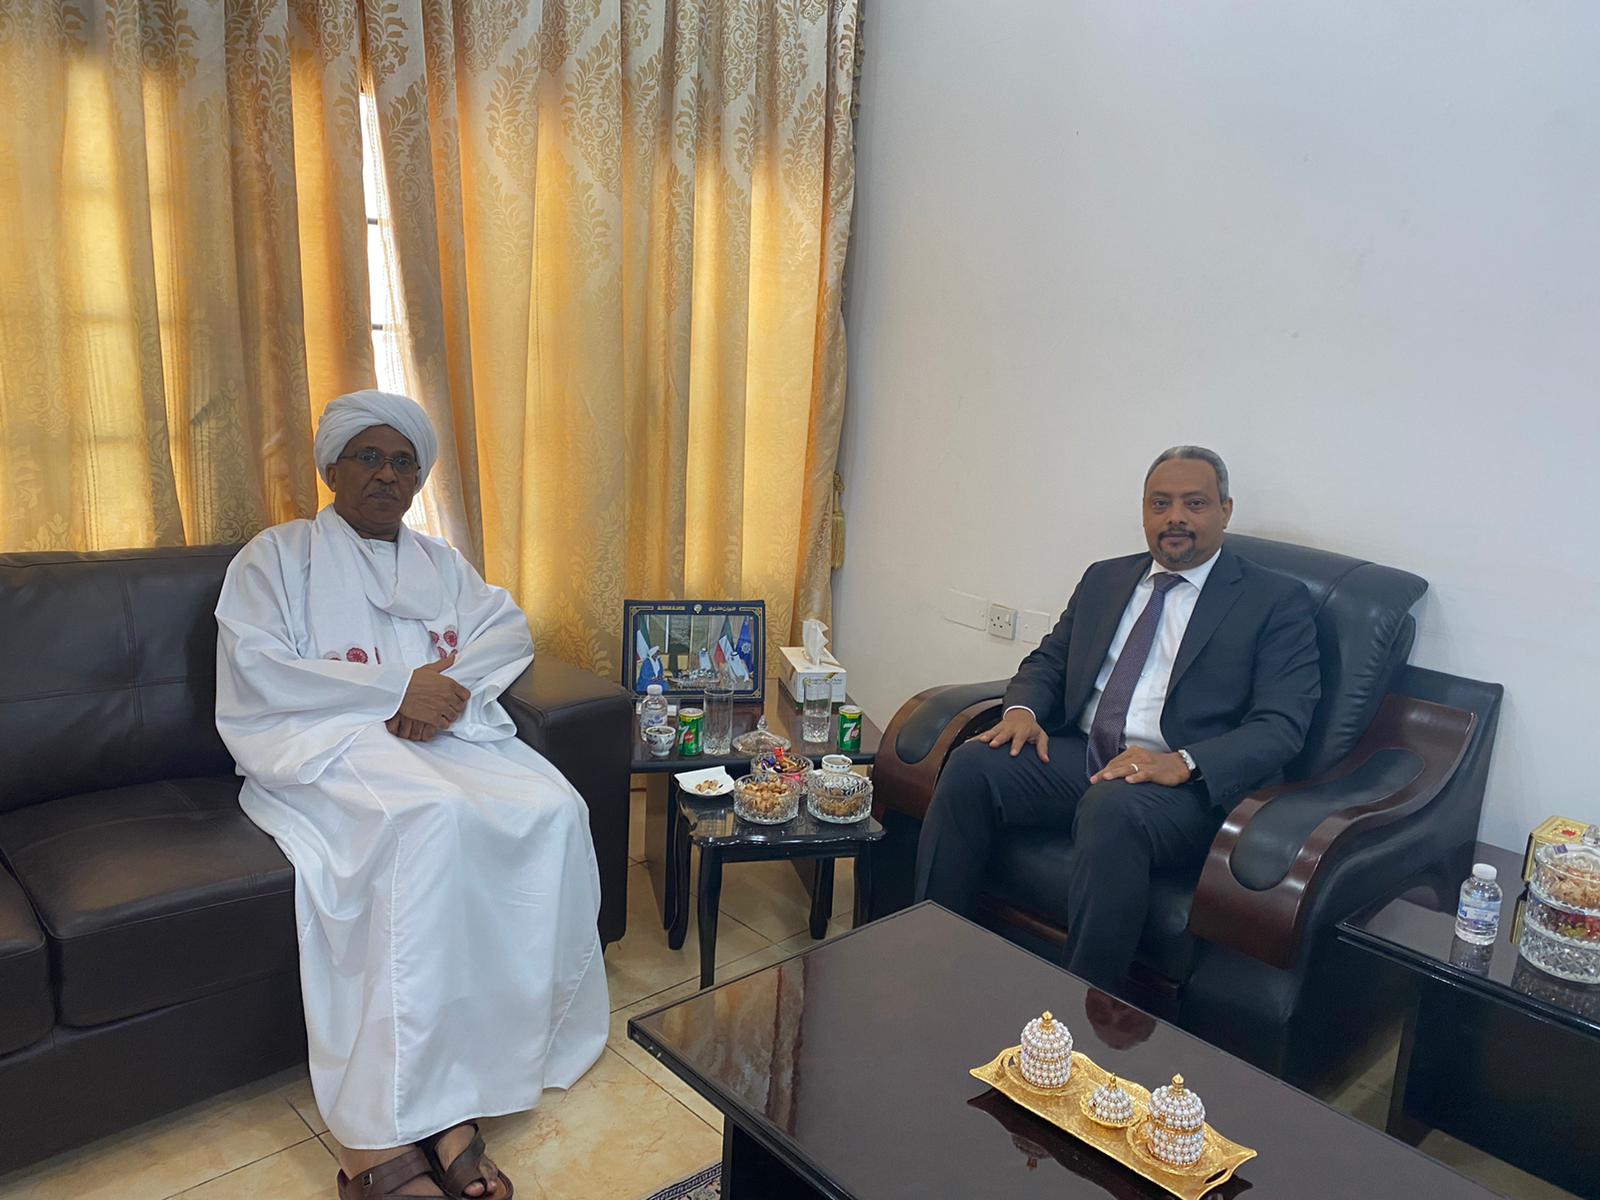 Visit of His Excellency to the Embassy of the Republic of Sudan